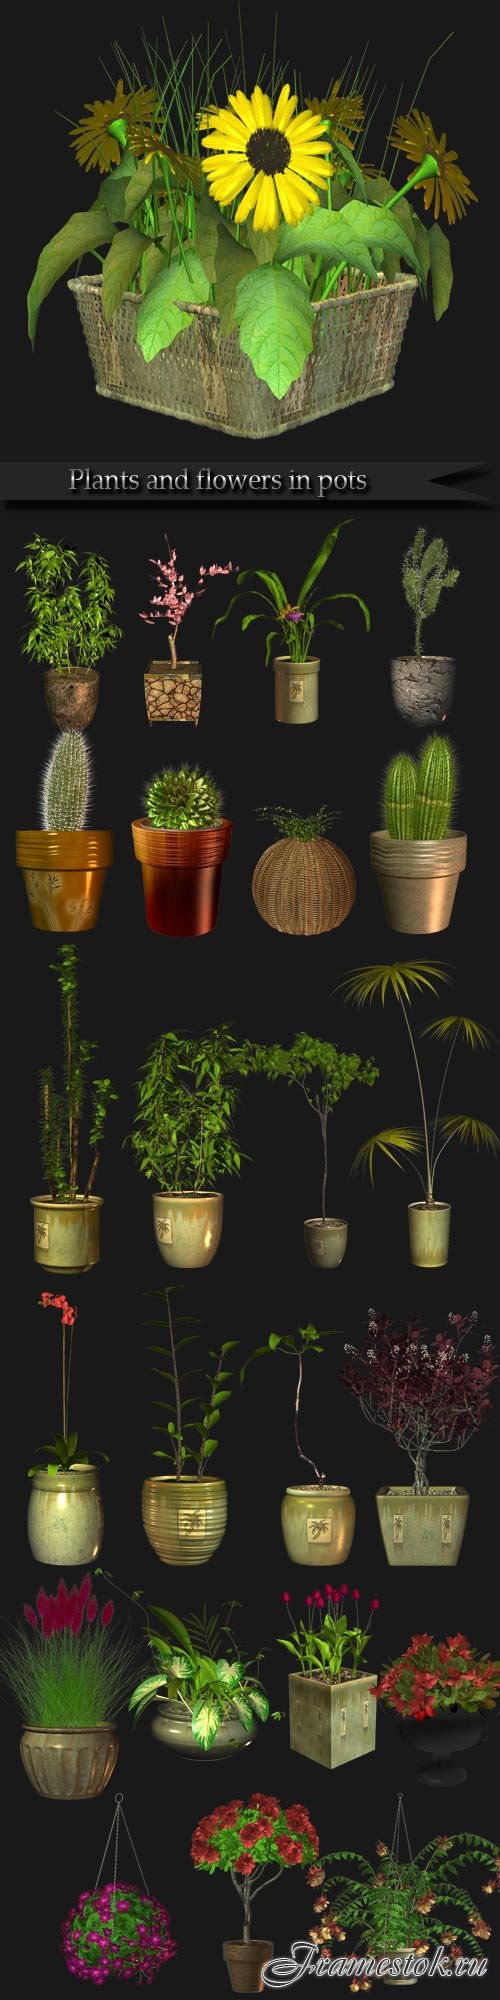 Plants and flowers in pots